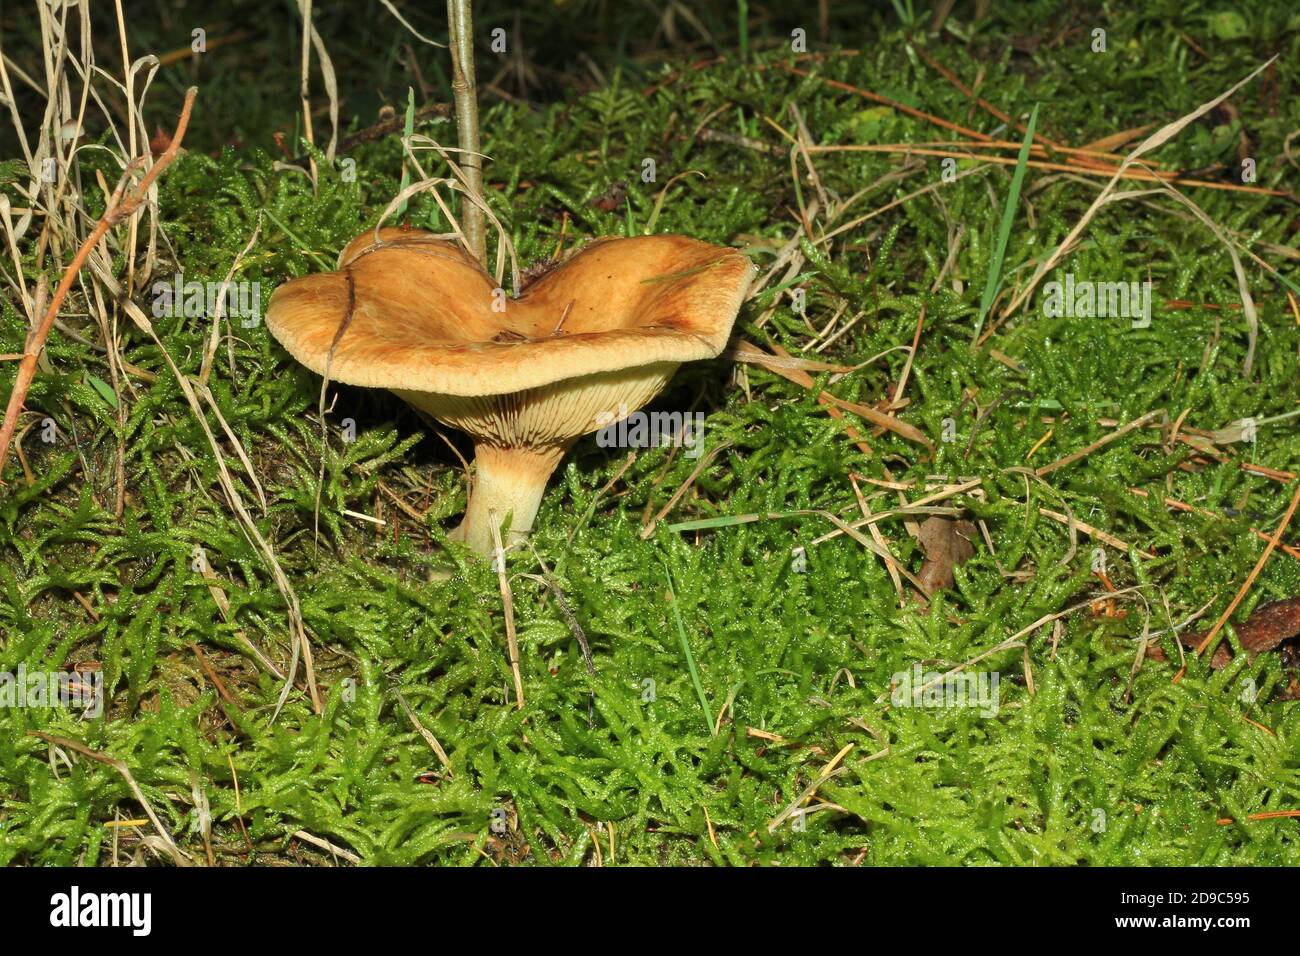 Bald Krempling, Paxillus involutus, growing in a forest near Marl, Germany Stock Photo